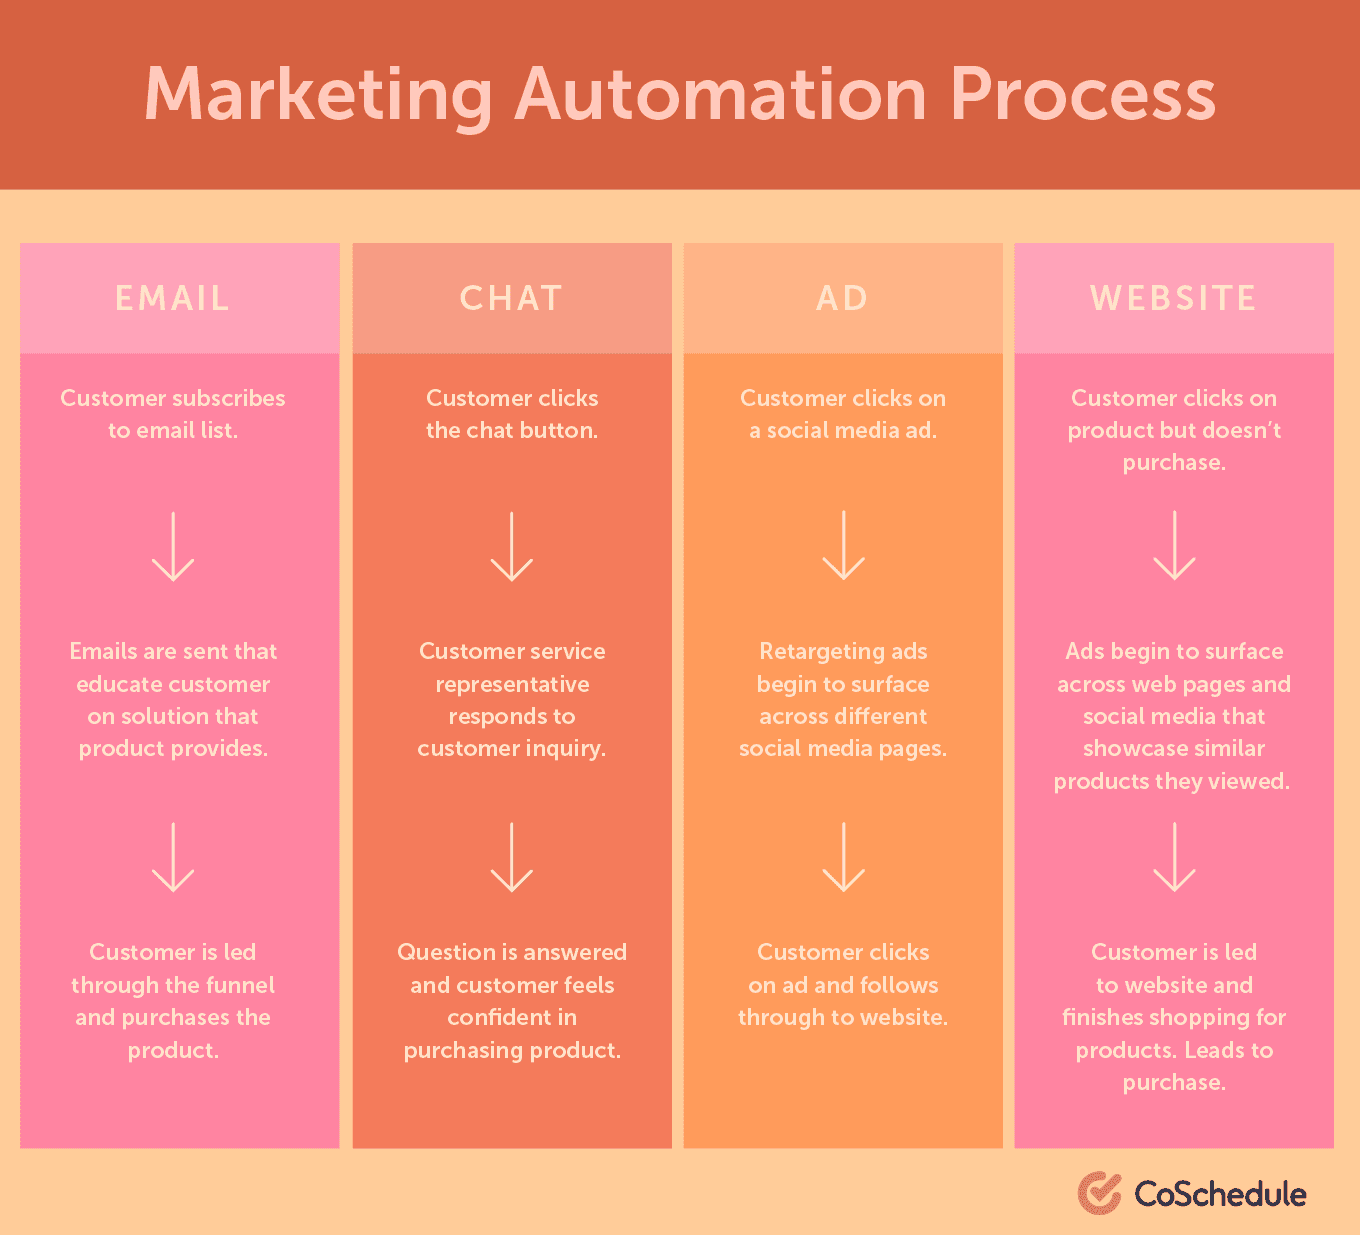 Marketing automation process - Email, chat, ad, website